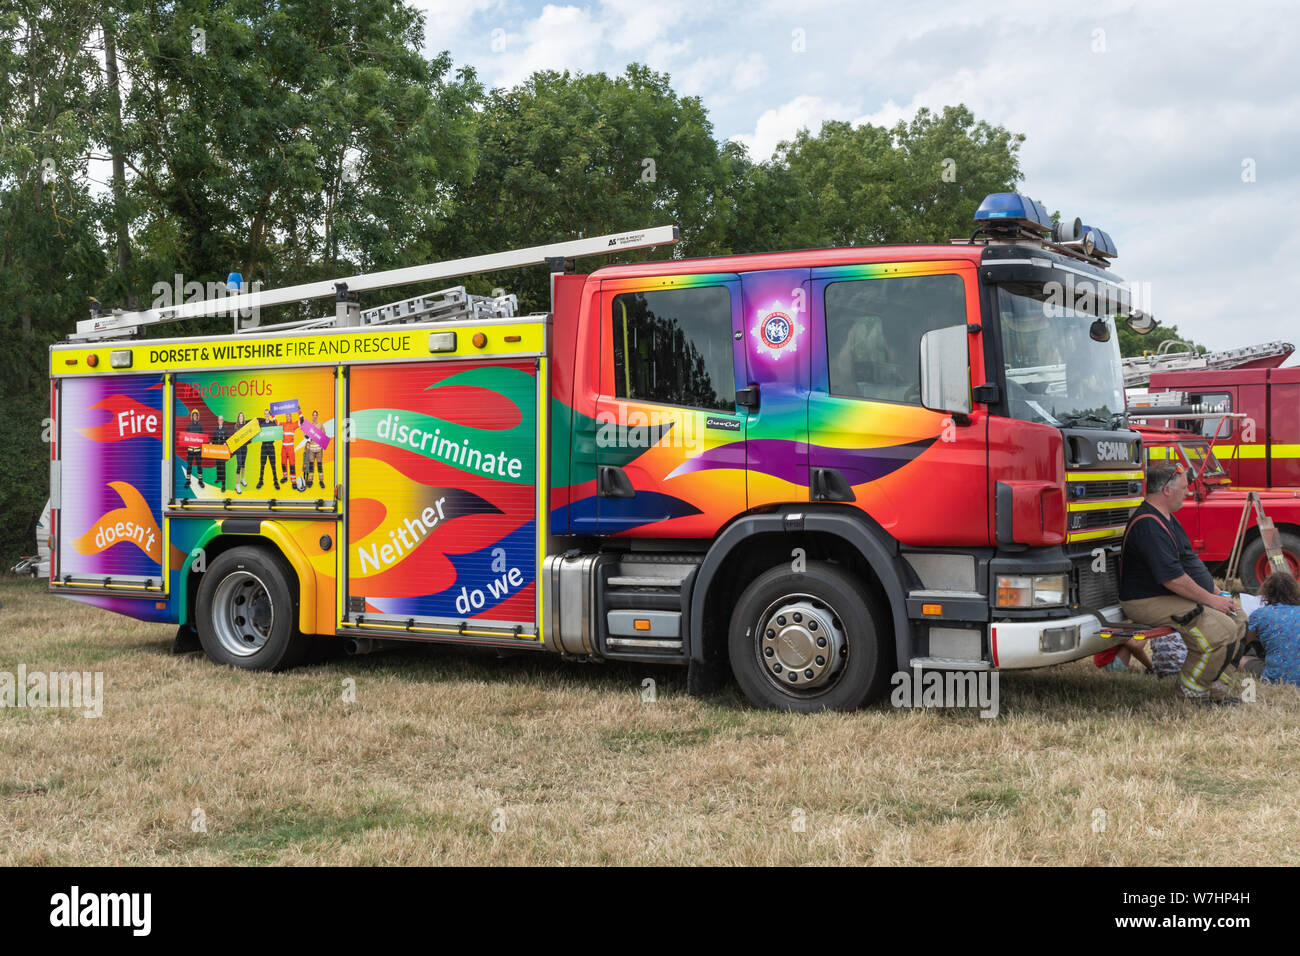 Fire engine painted with Pride rainbow colours, with words Fire doesn't discriminate, neither do we on it, at the Odiham Fire Show 2019, Hampshire, UK Stock Photo